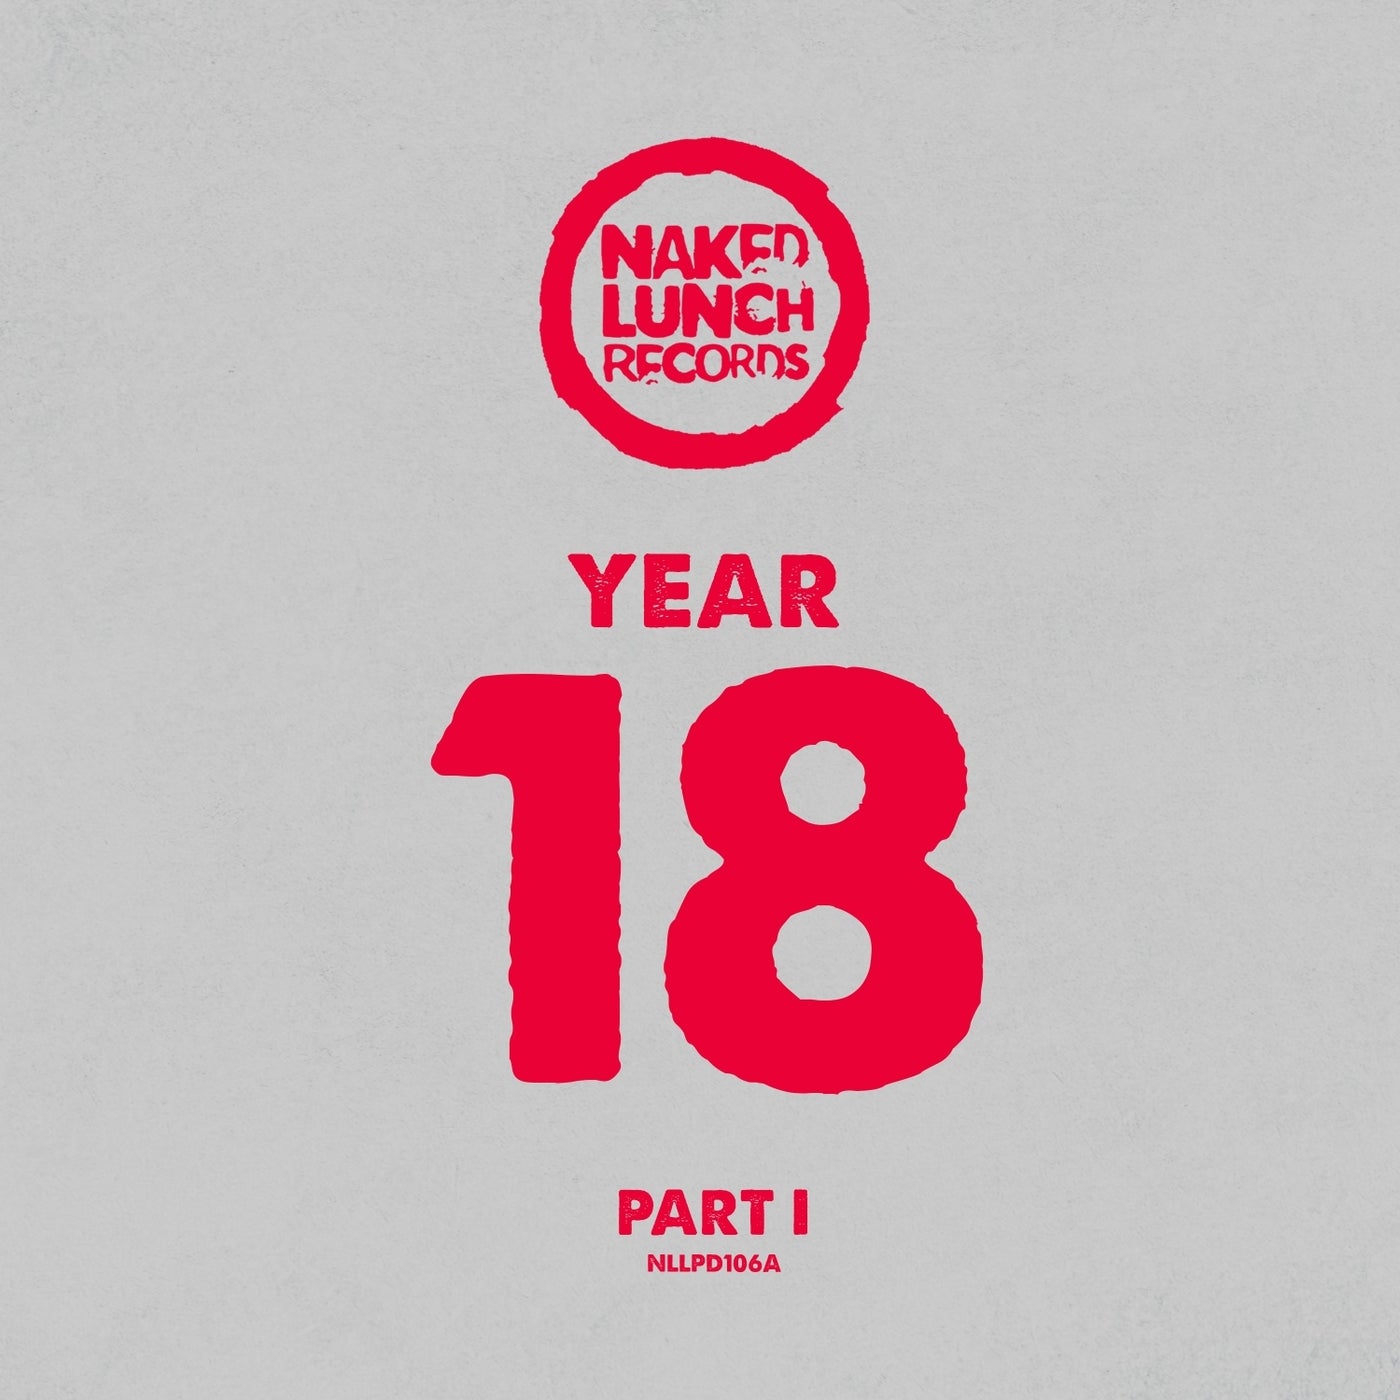 NAKED LUNCH YEAR 18 - PART I